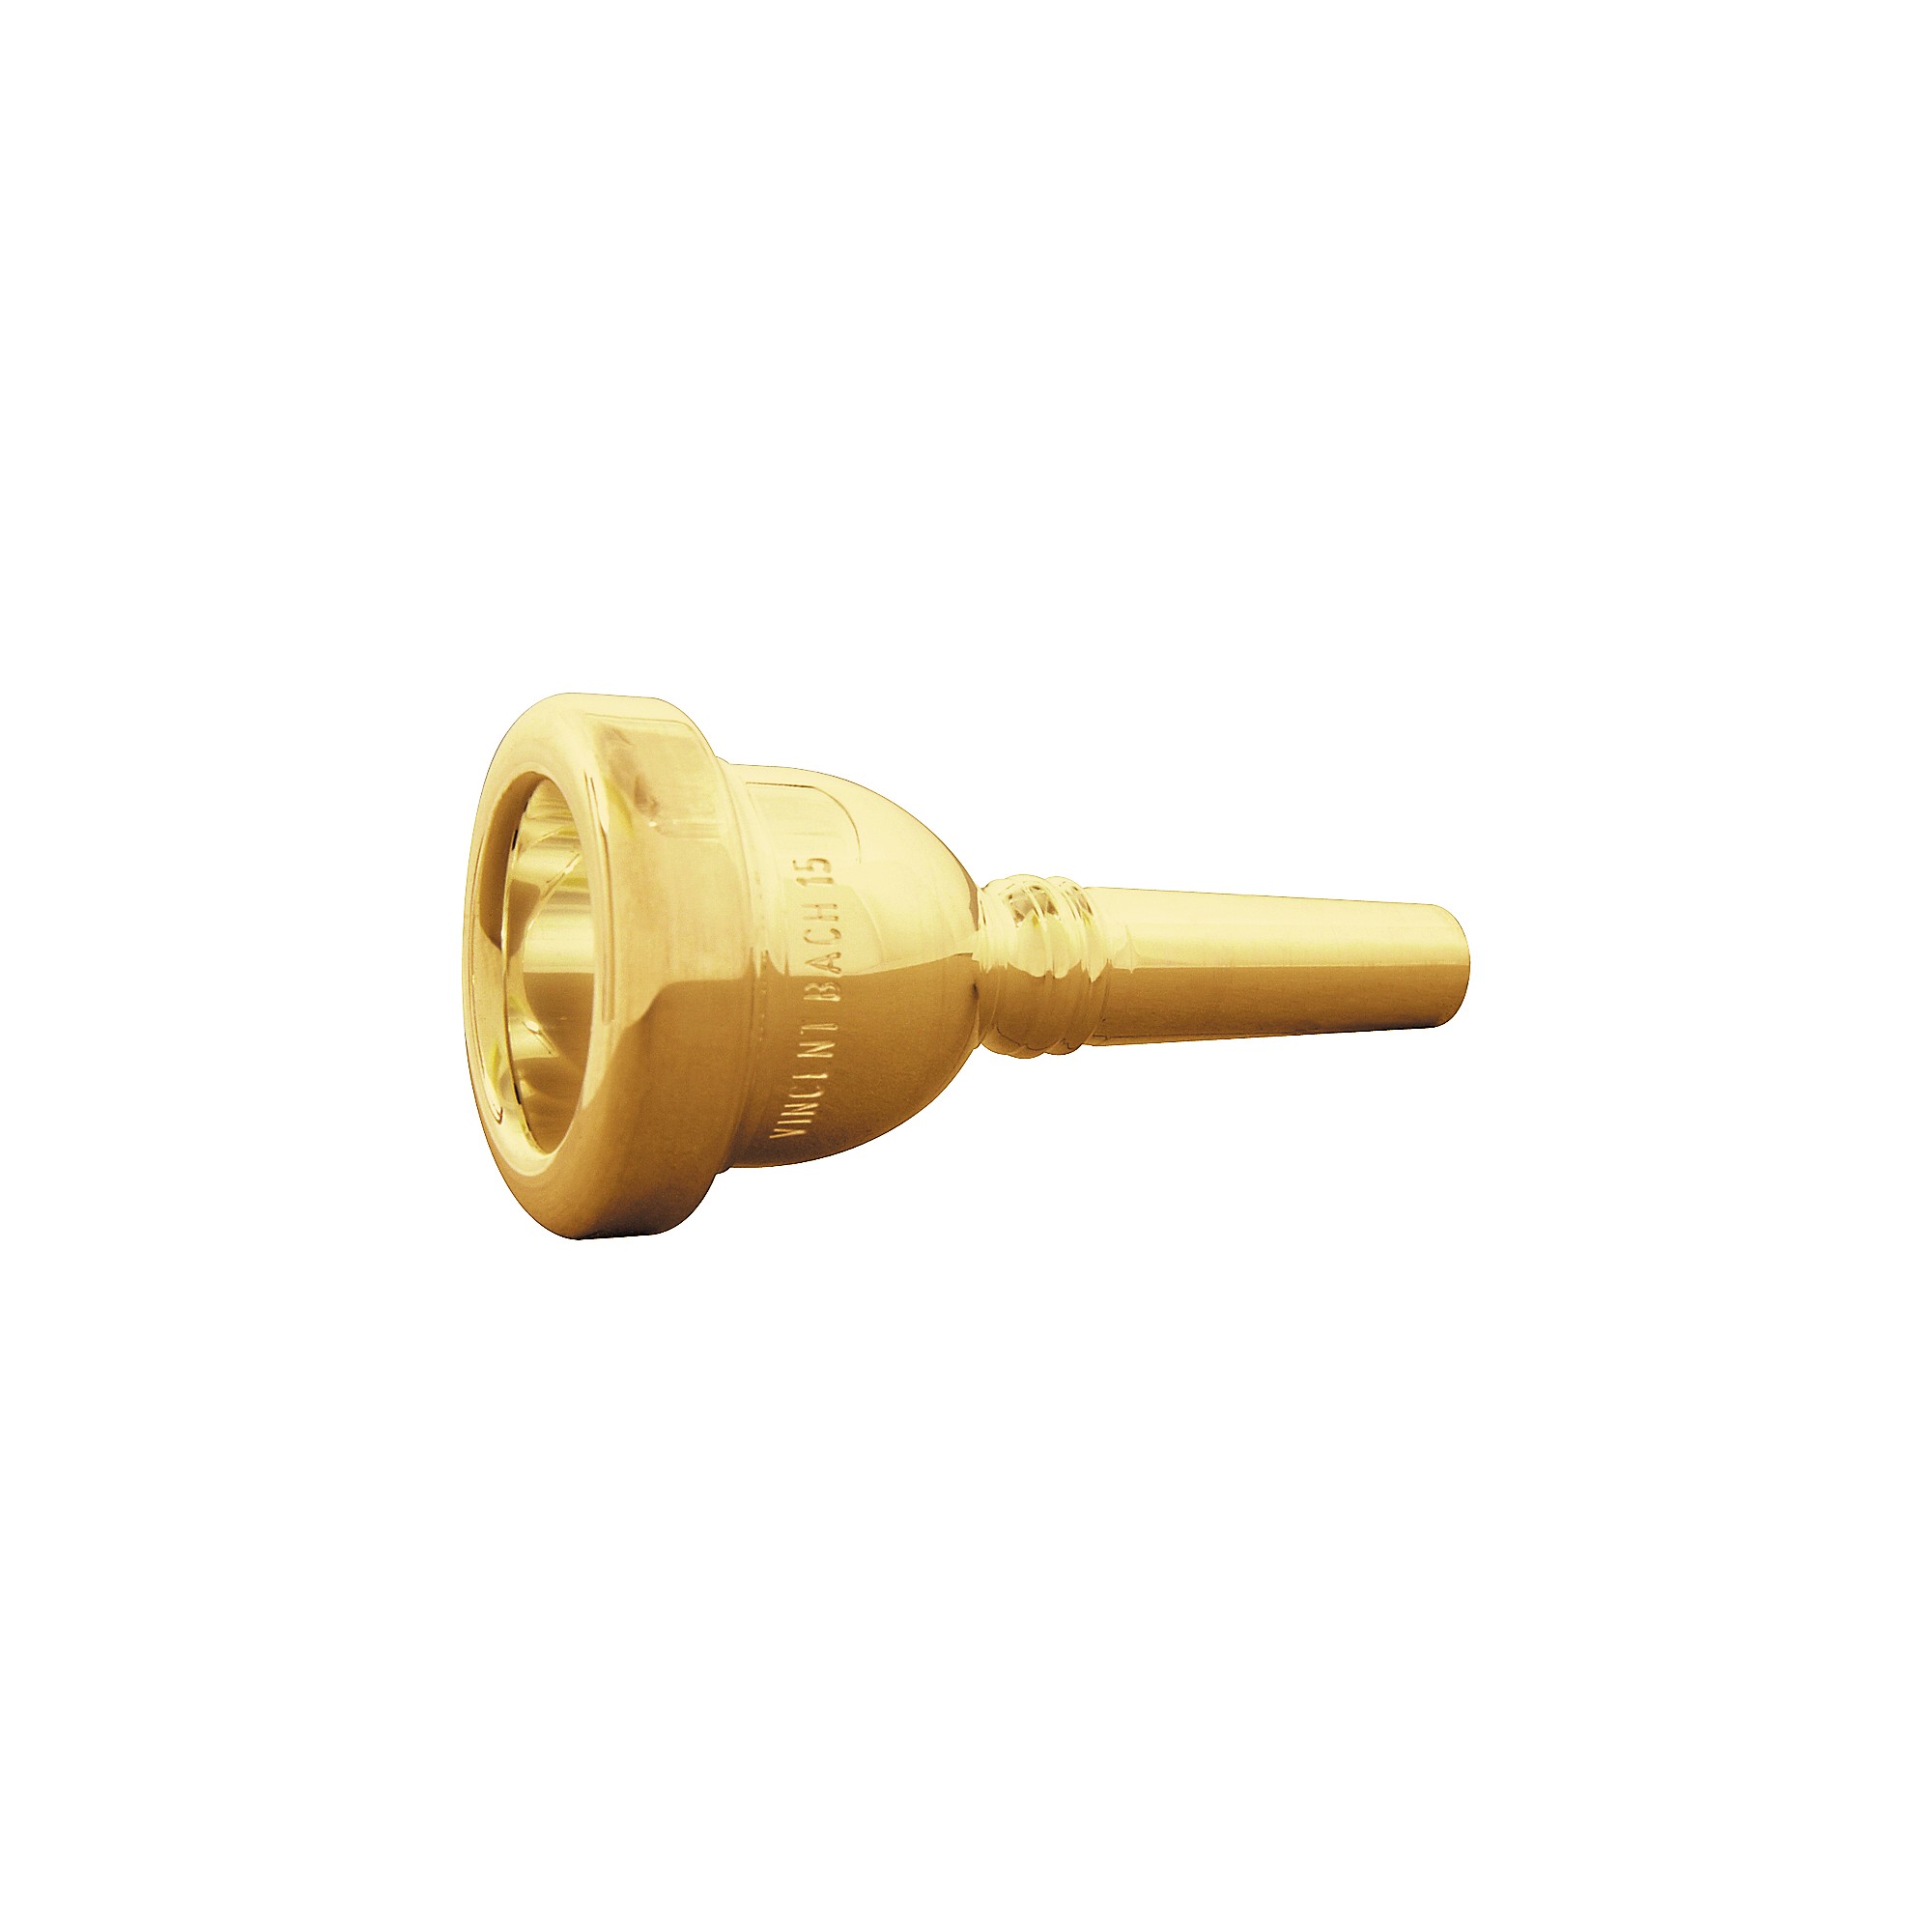 Bach Standard Series Small Shank Trombone Mouthpiece in Gold